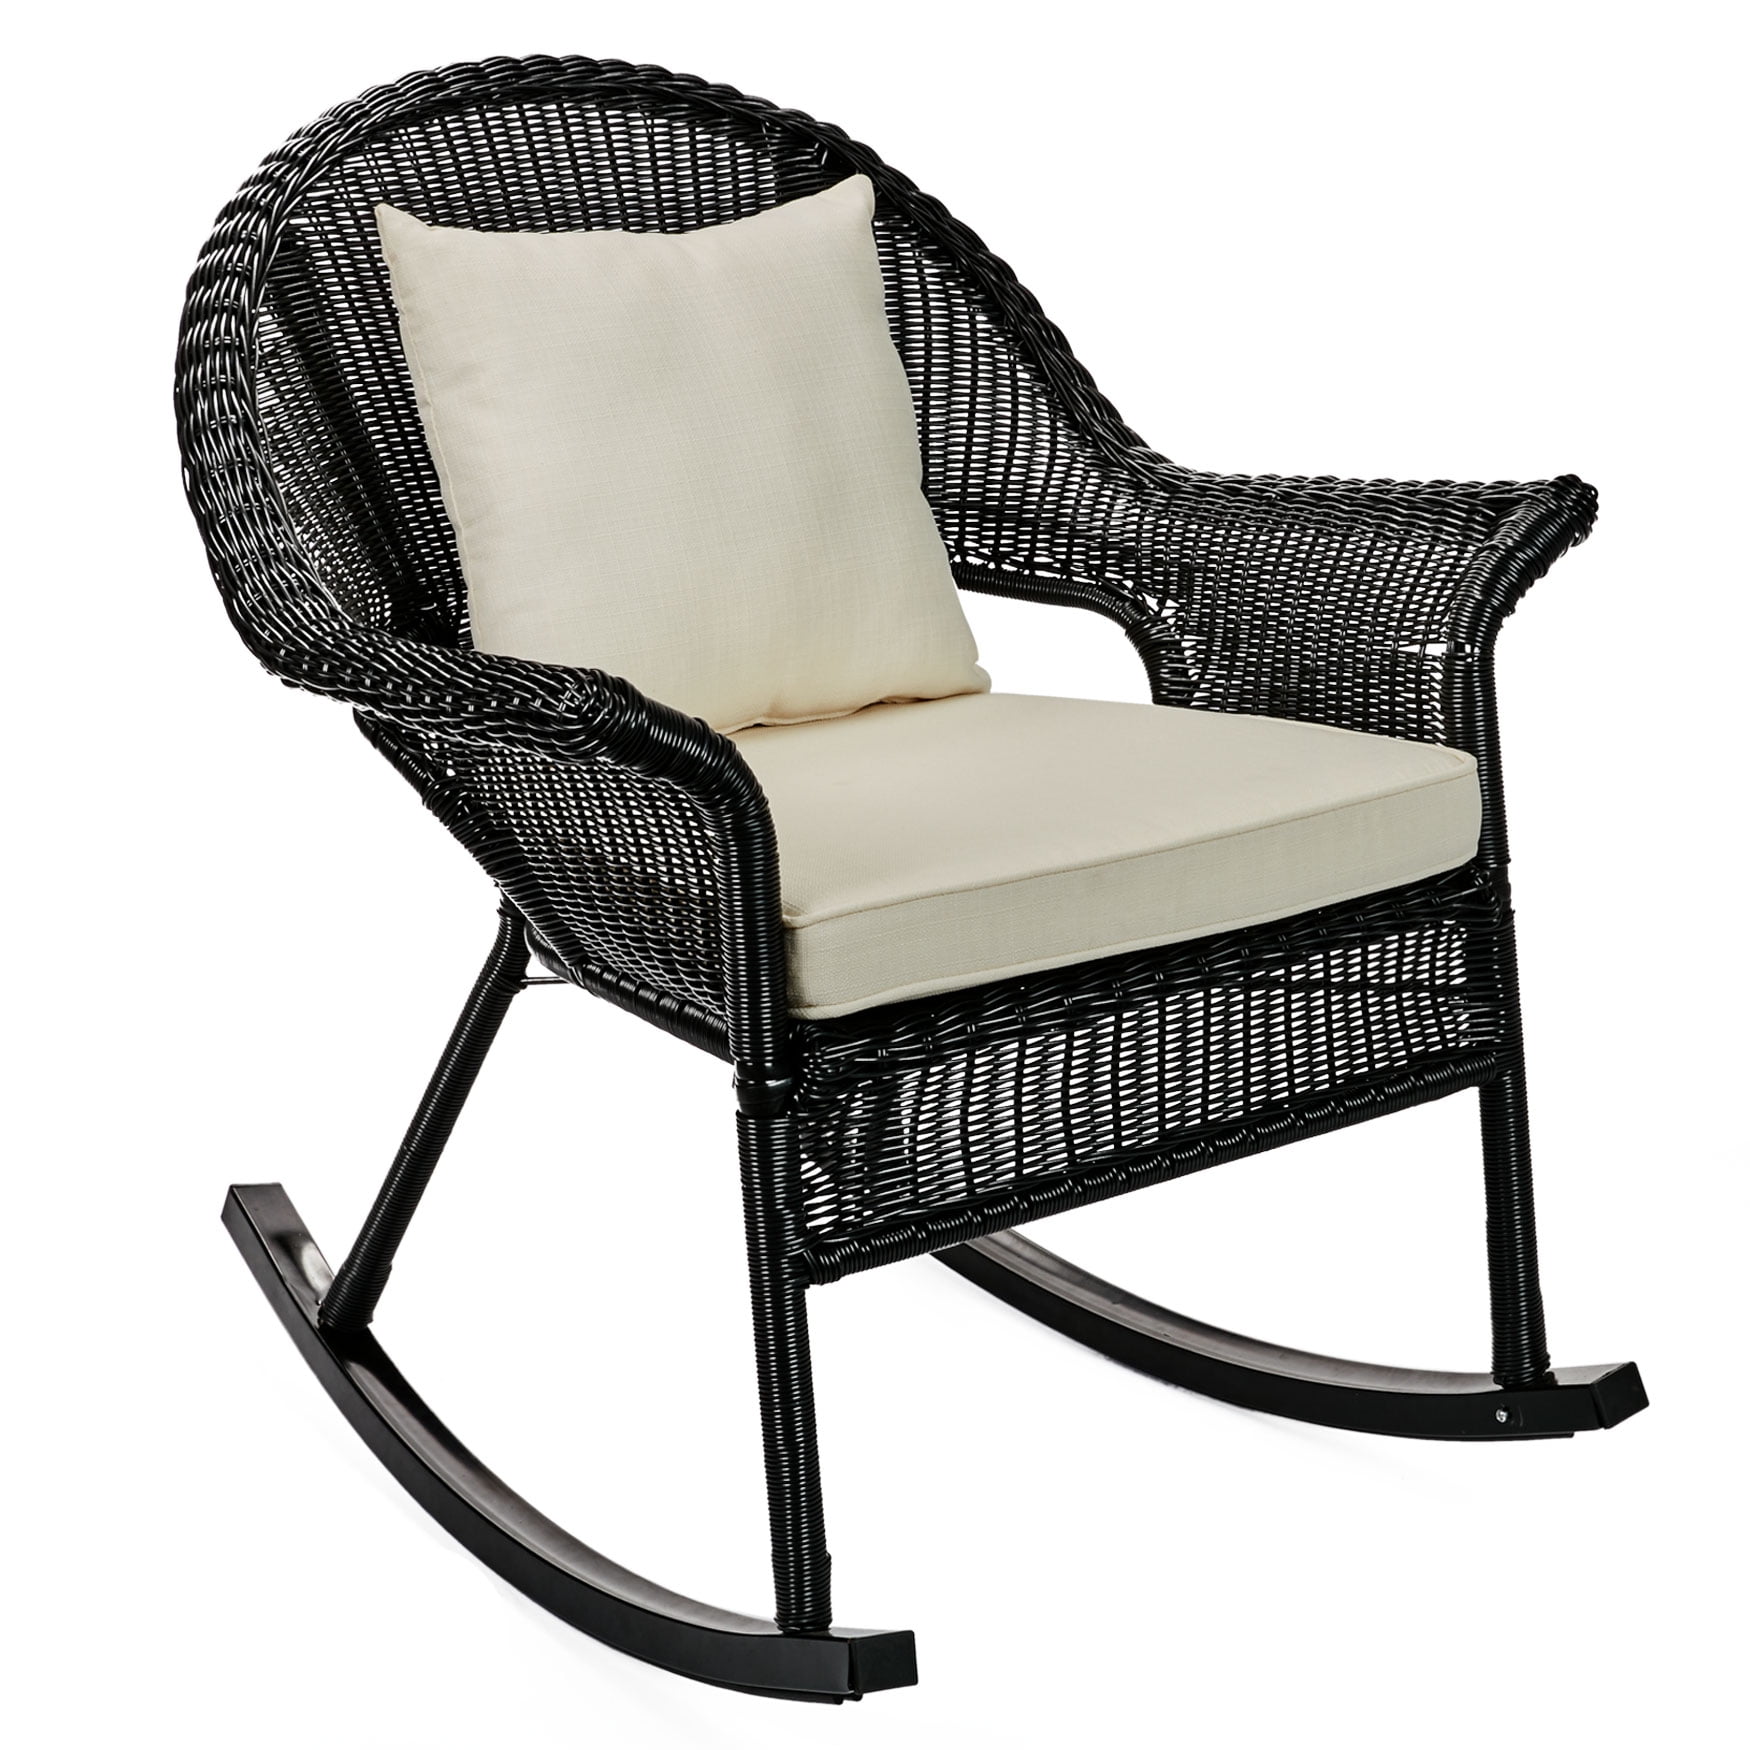 Details about   Wide Seat Rocking Chair Patio Furniture Outdoor Front Porch Rocker Soft Cushion 